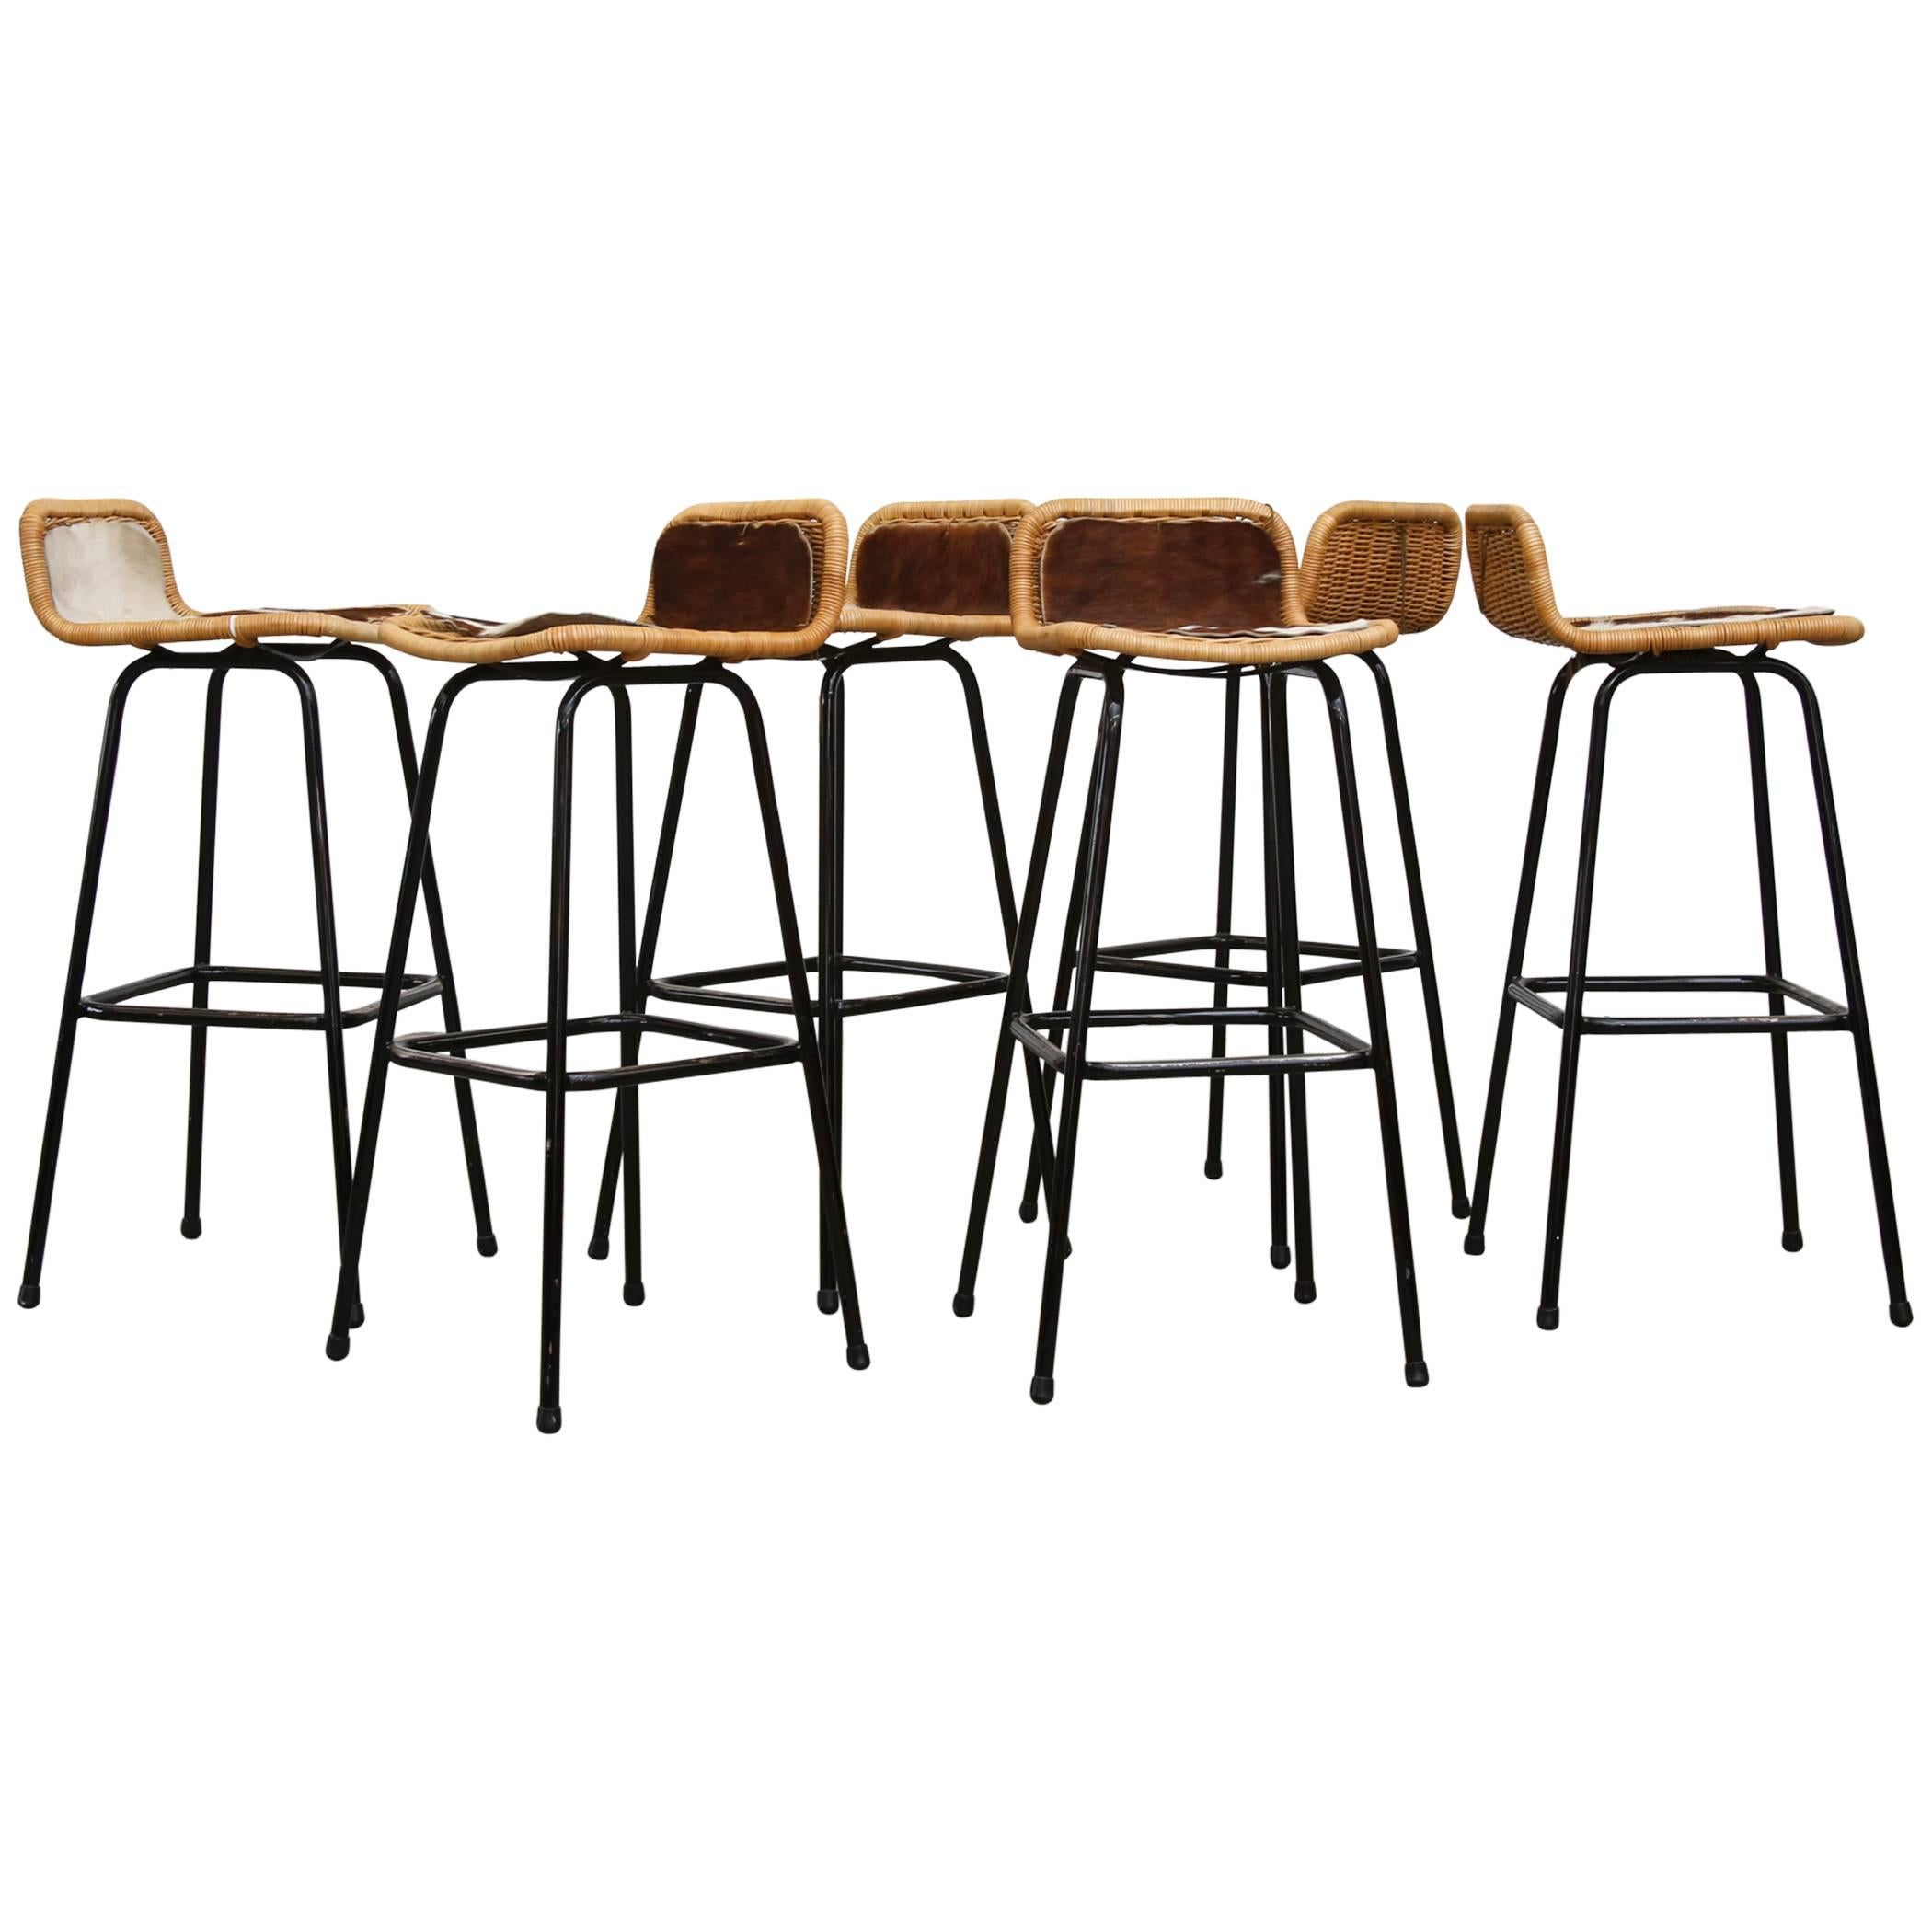 Set of Six Charlotte Perriand Style Wicker Bar Stools with Cow Hide